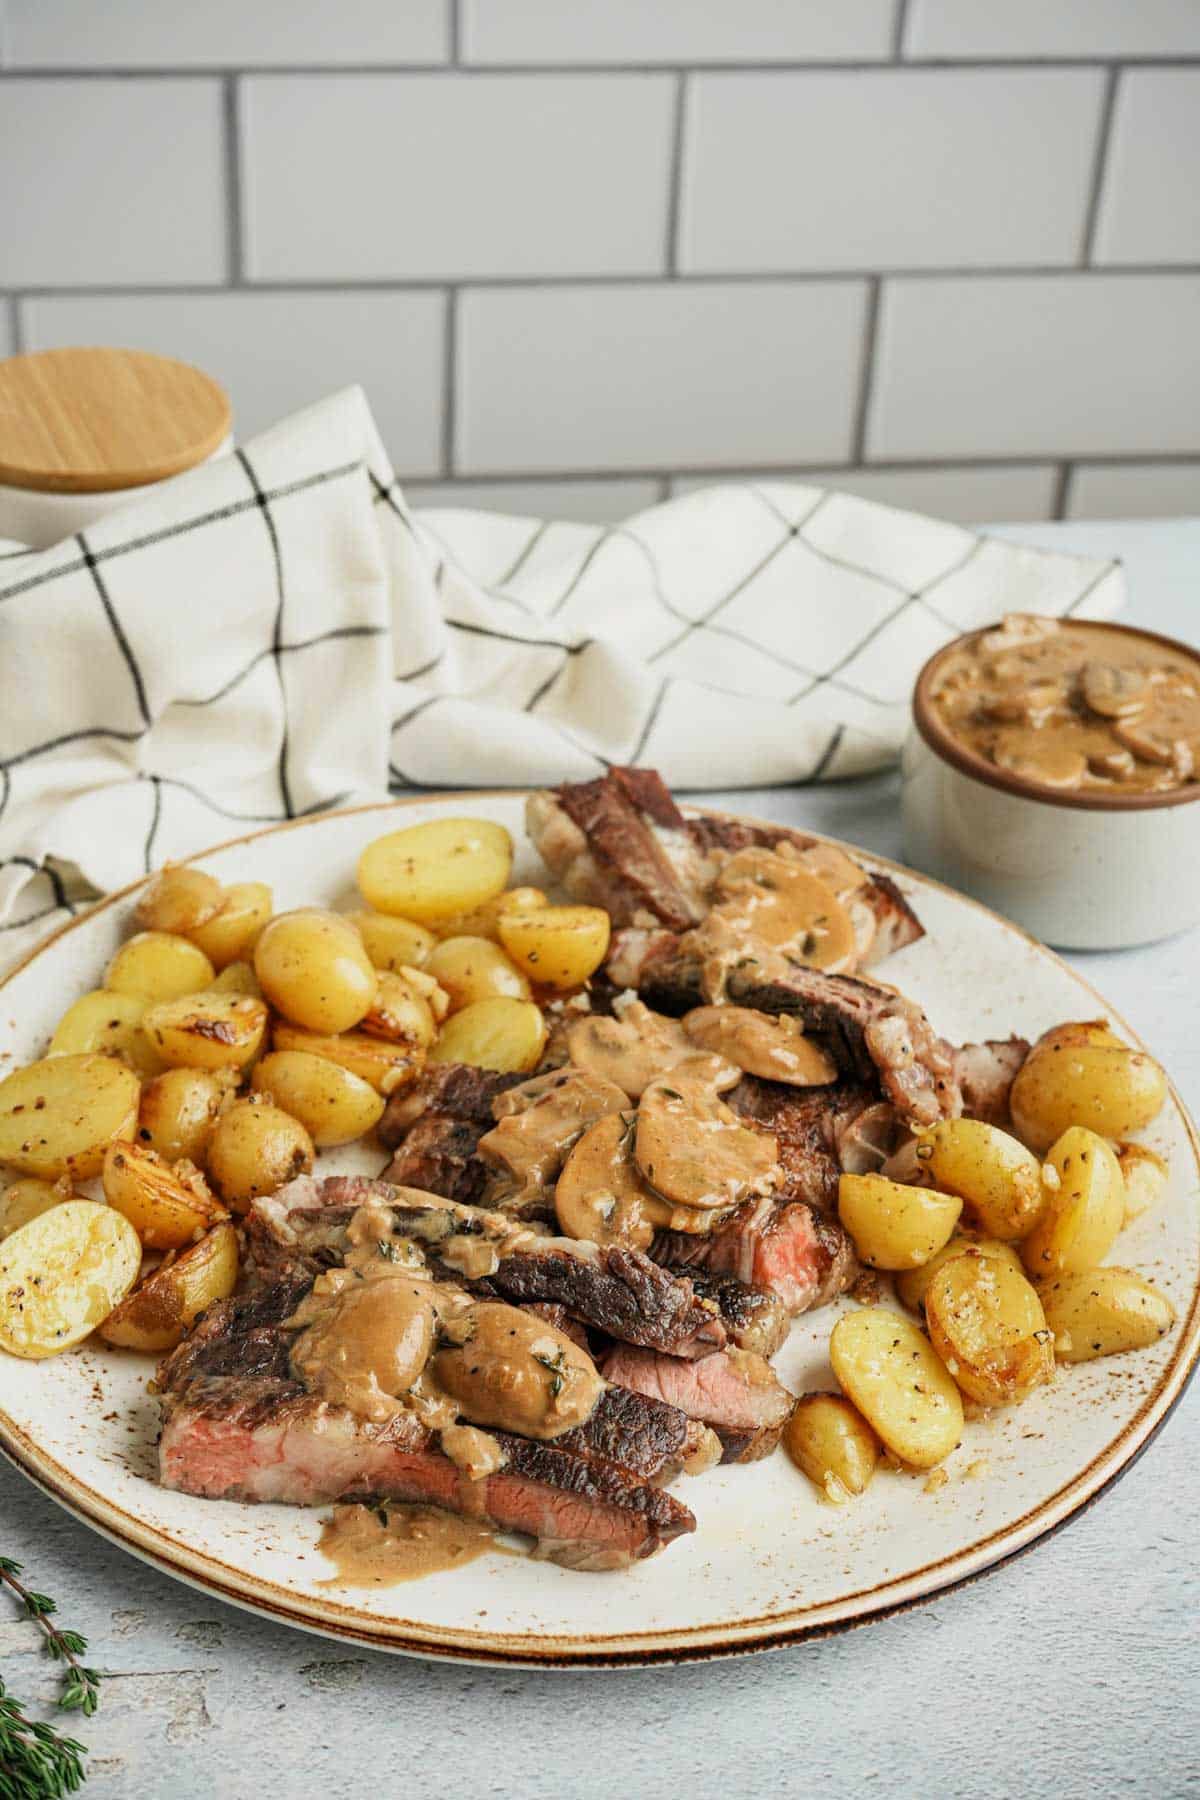 potatoes and sliced beef with gravy on a plate with a white towel in the background